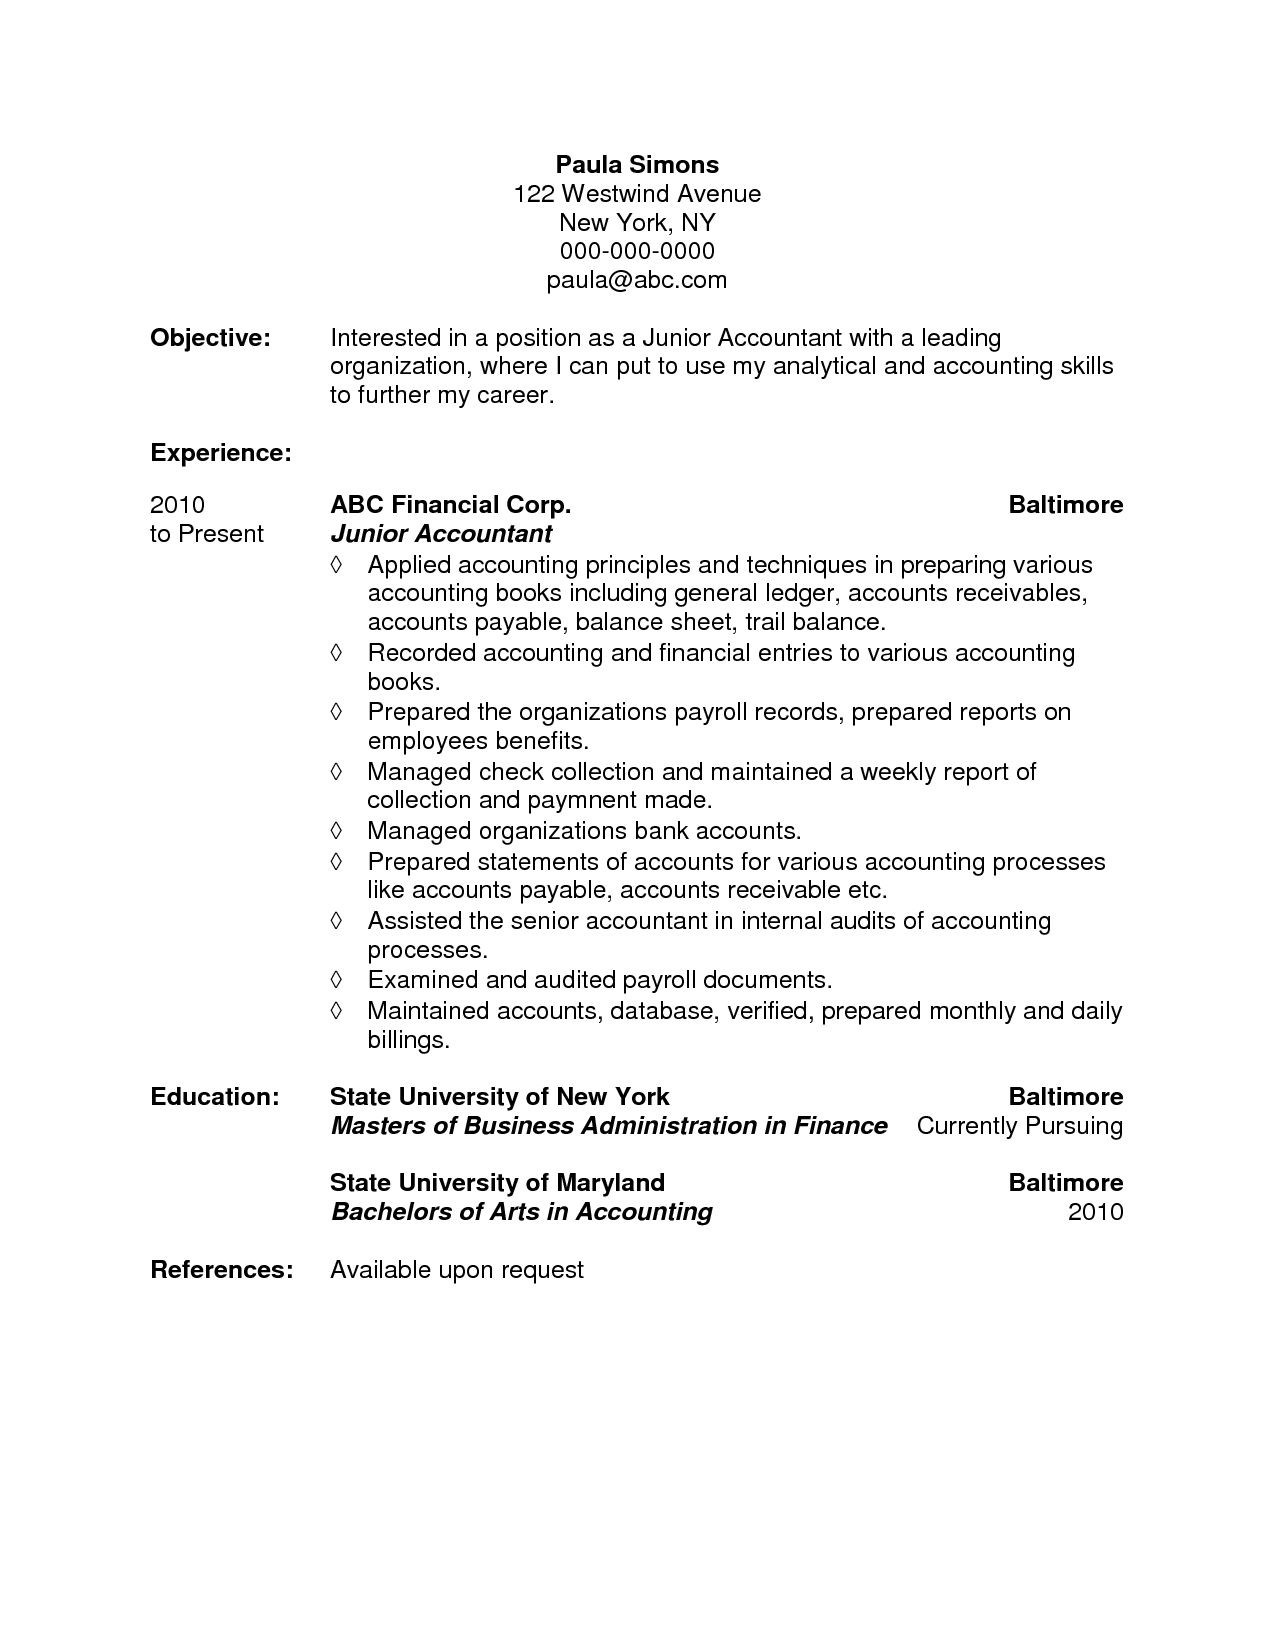 resume objective examples studentml